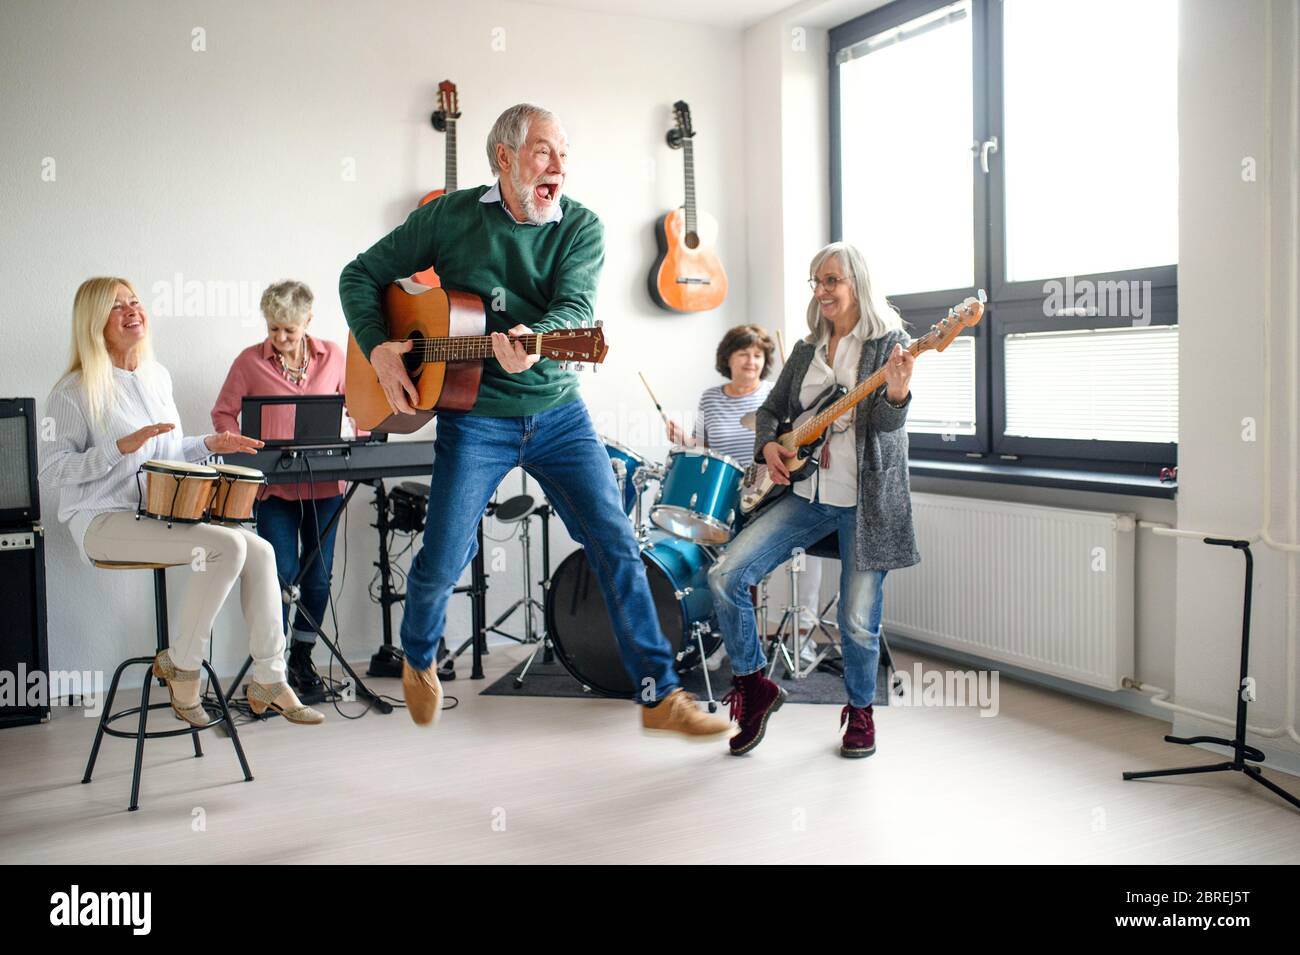 Group of senior people playing musical instruments indoors in band. Stock Photo